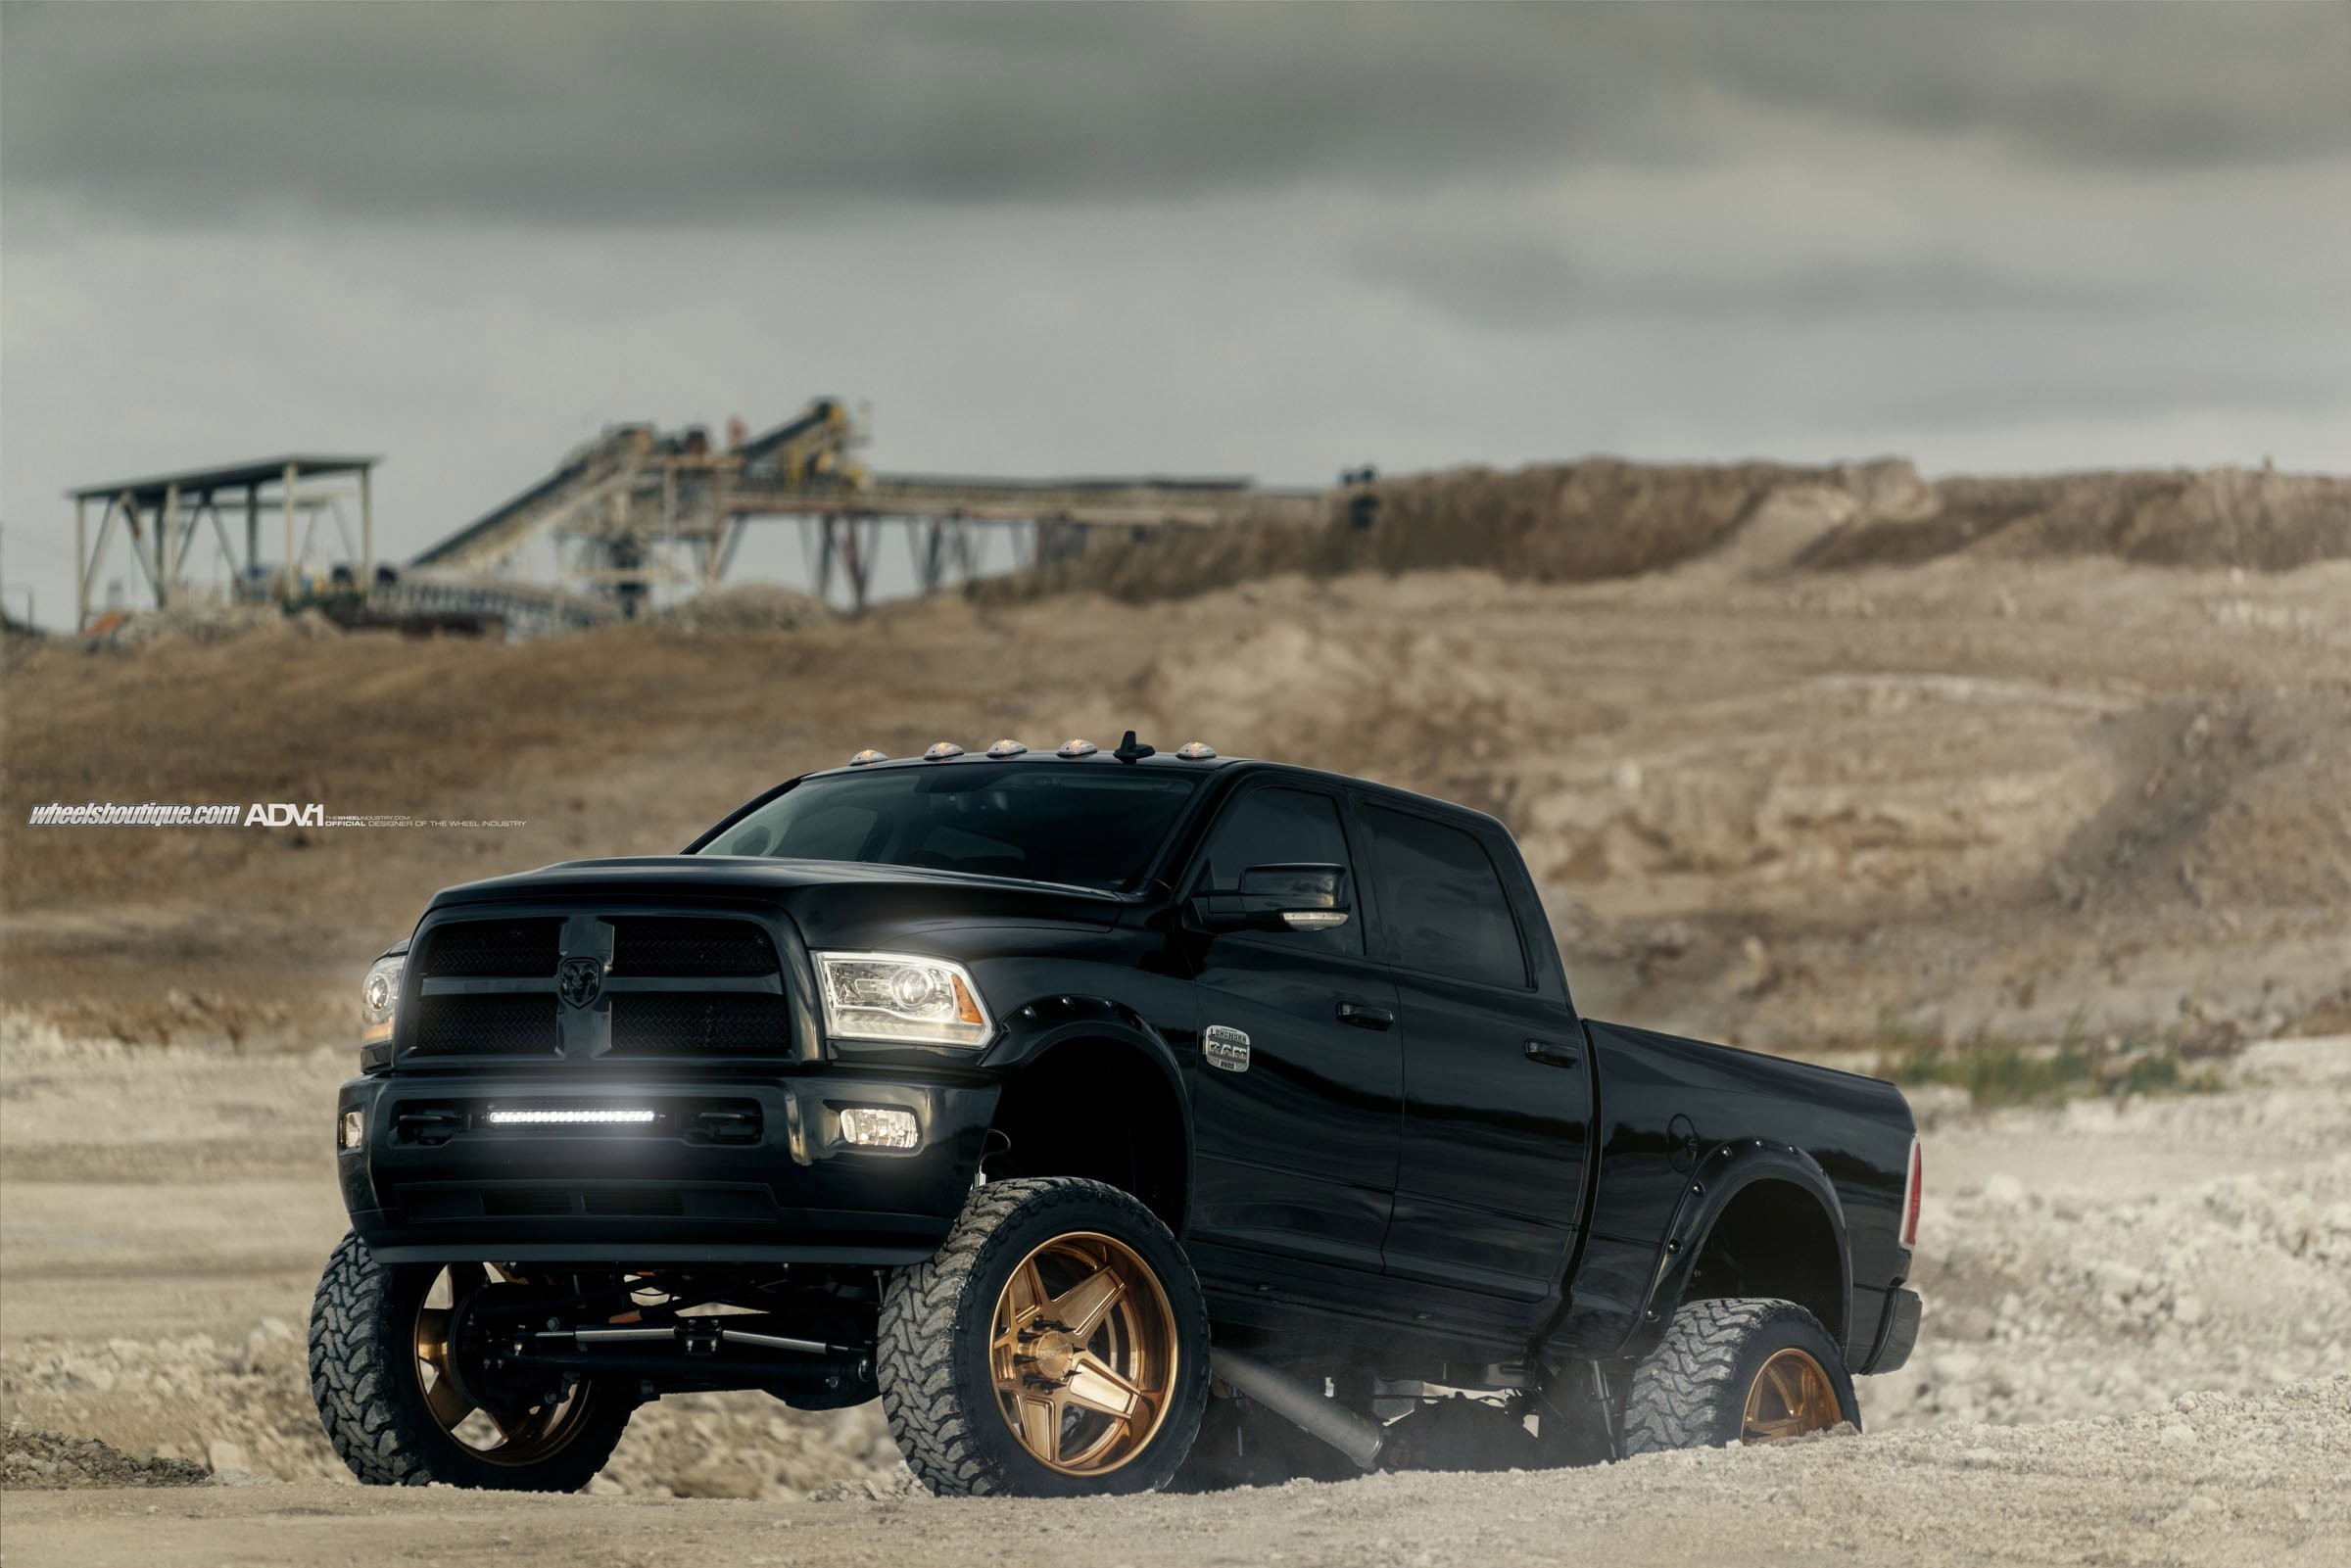 2400x1601 Dodge Truck Wallpaper High Quality Resolution With High Resolution ... src